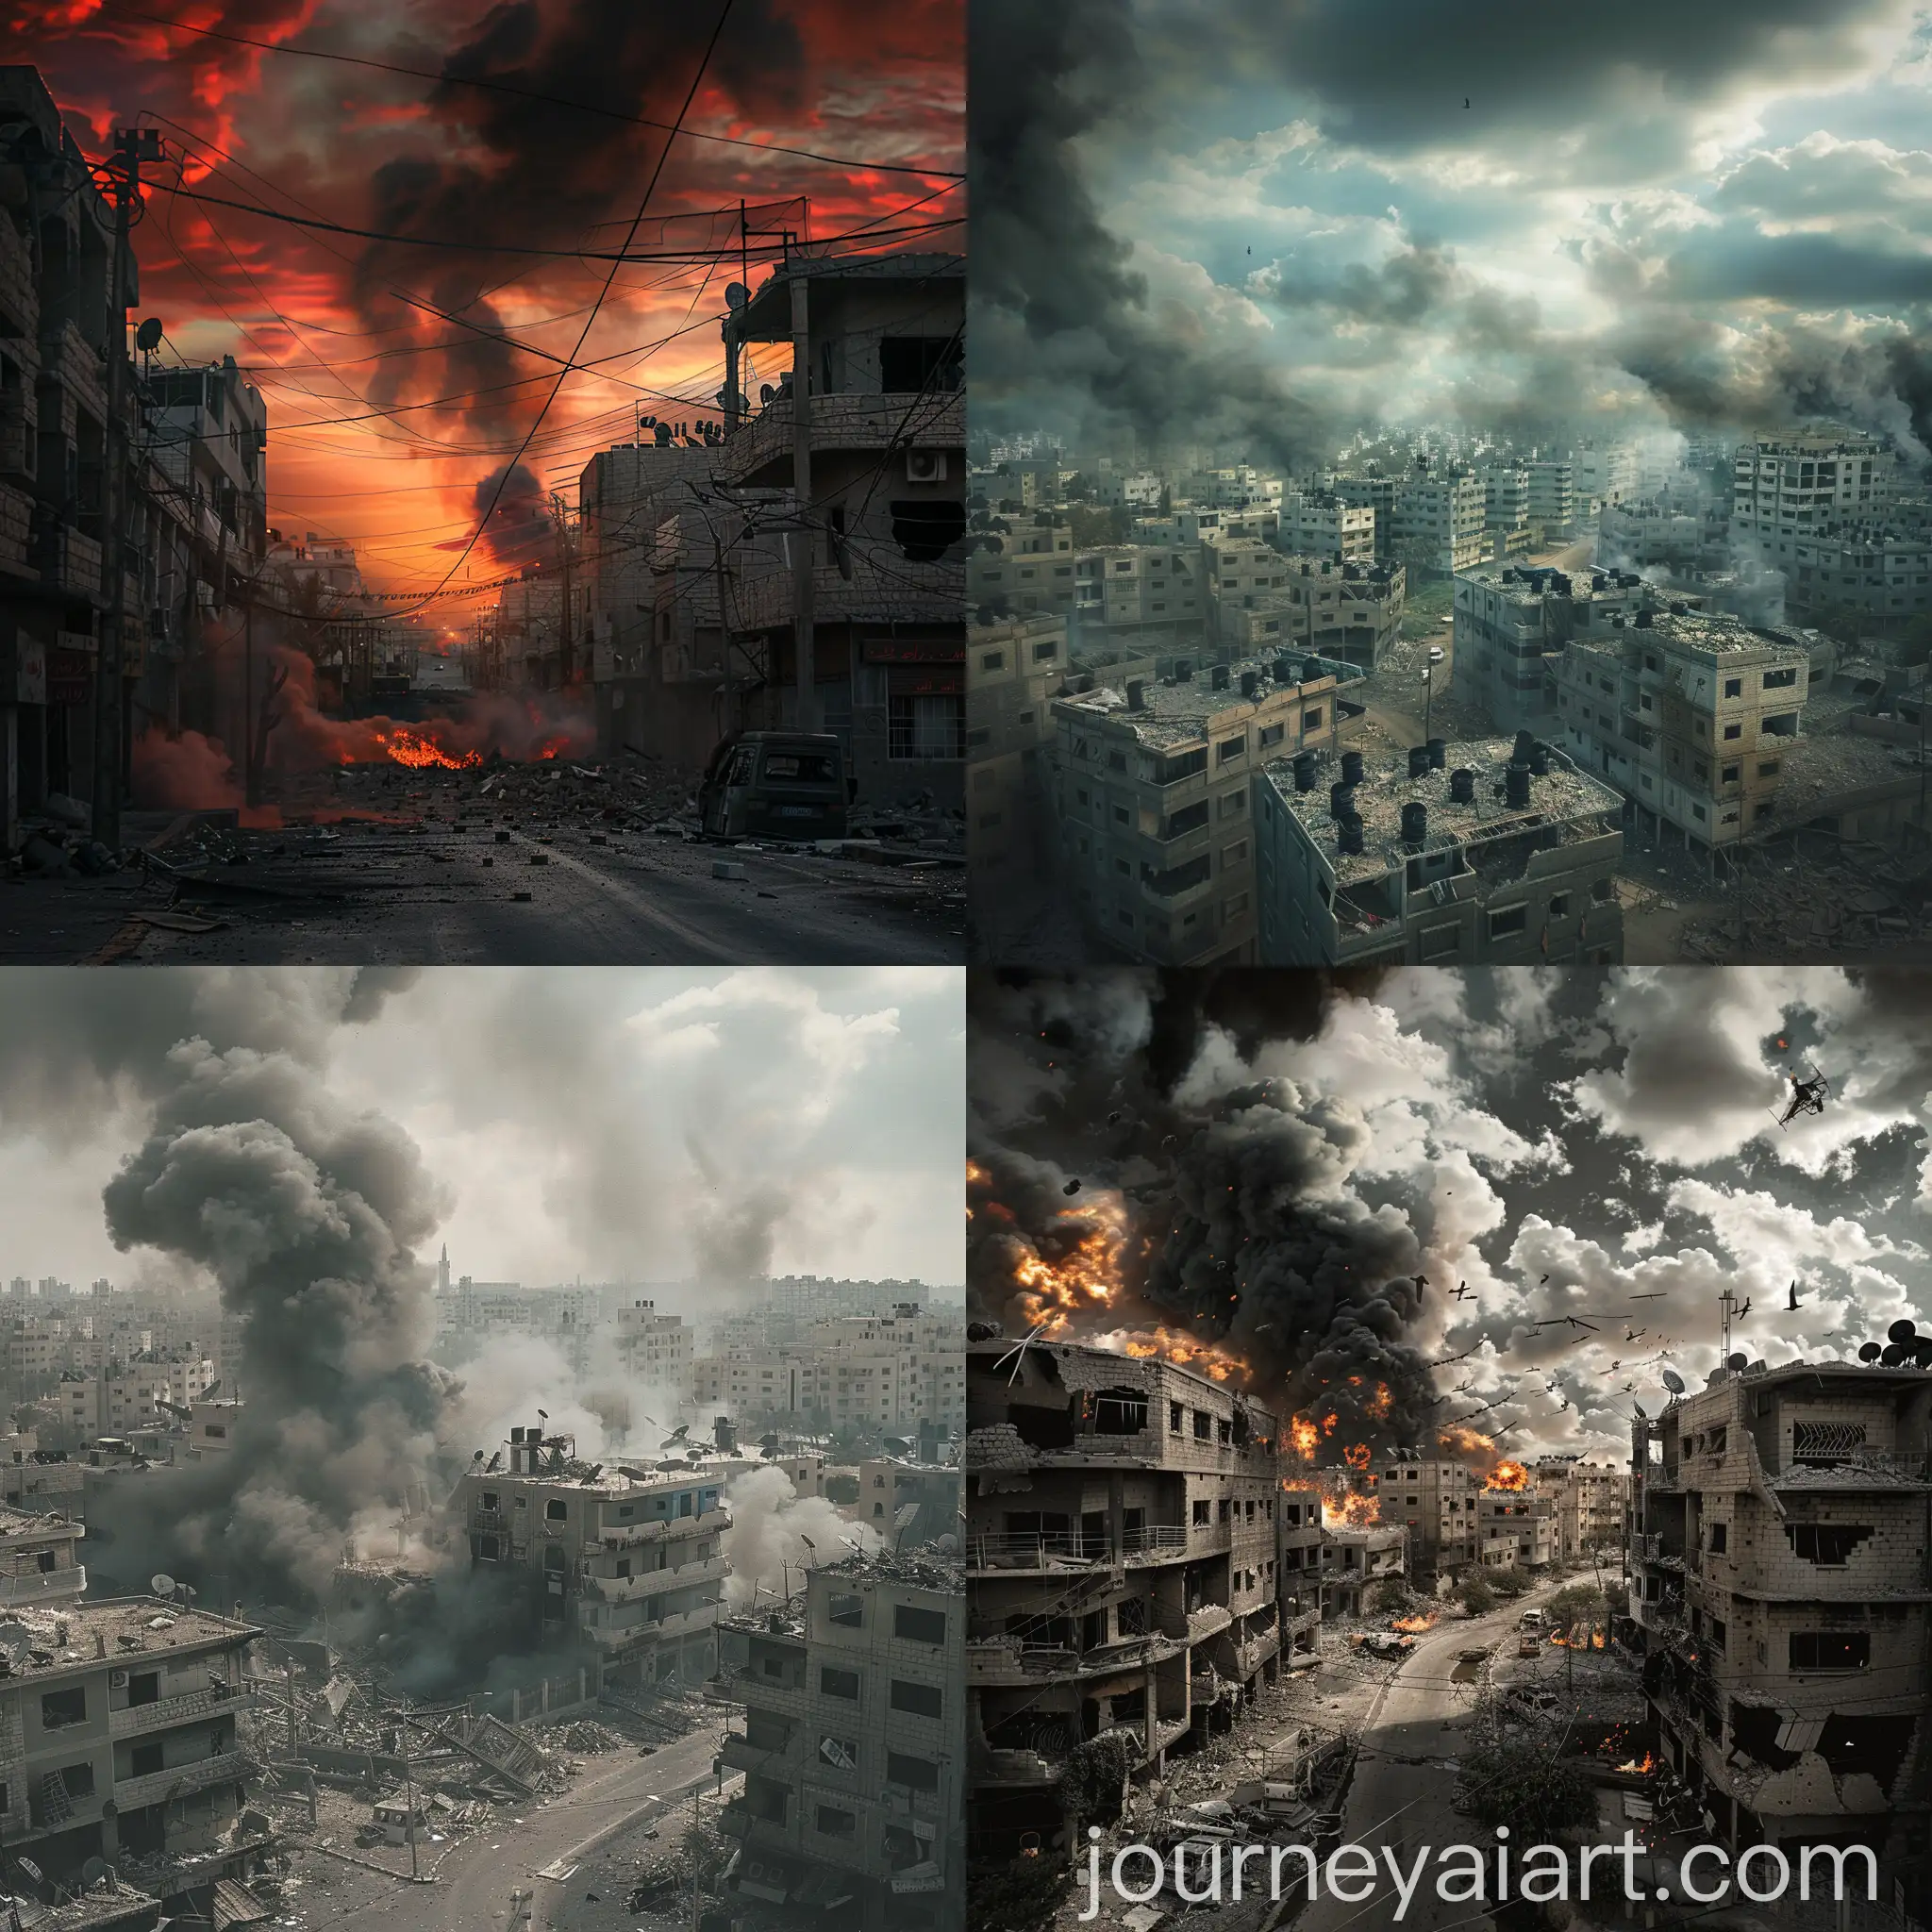 Photorealistic-Depiction-of-the-War-in-Gaza-Strip